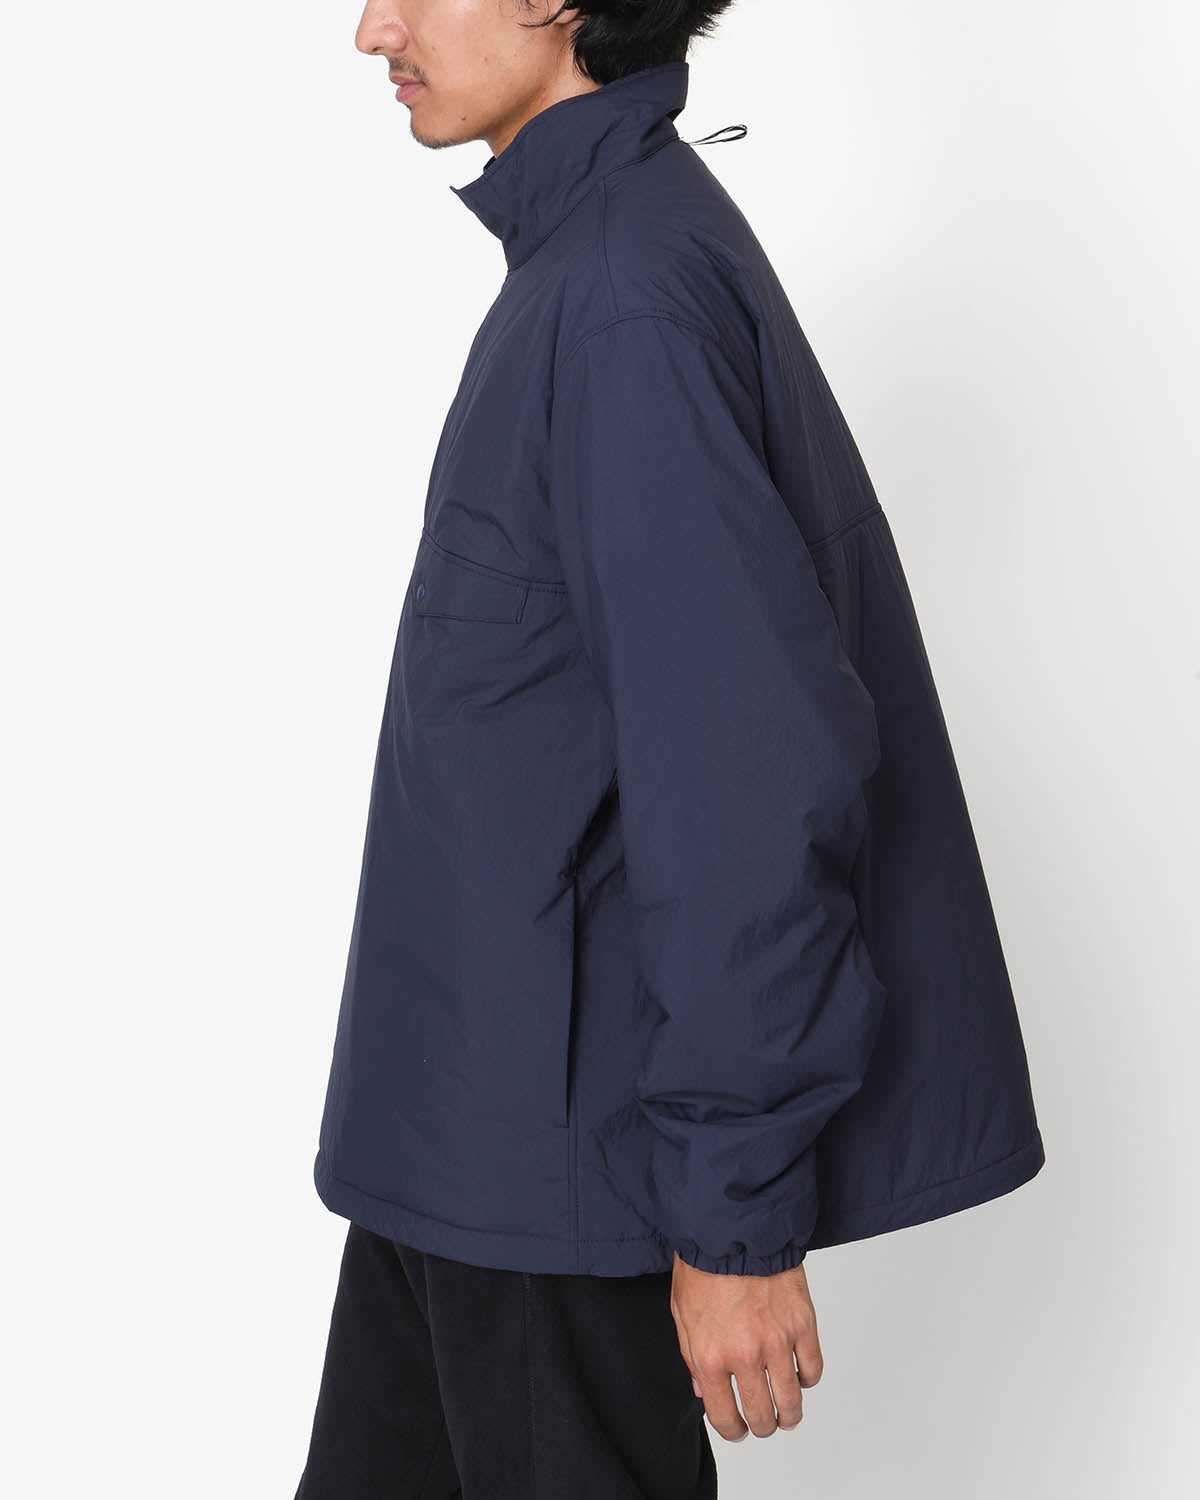 TRACK PULLOVER PUFF JACKET